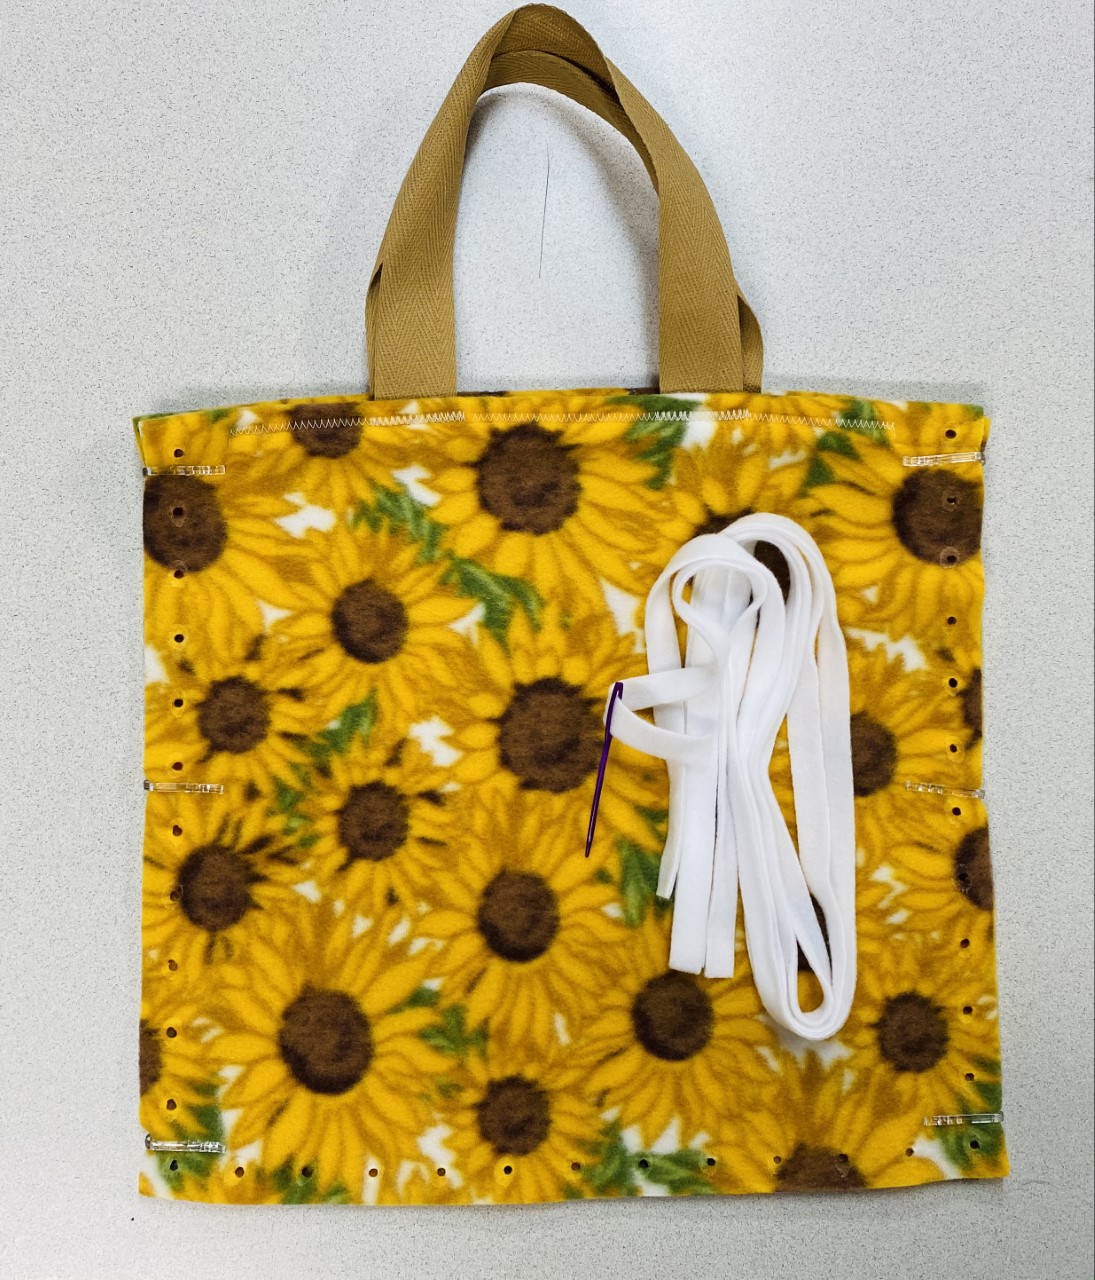 13" fleece tote bag in yellow, brown, and white with sunflowers and green leaves, tan tote straps, and white fleece ribbon to lace with plastic needle